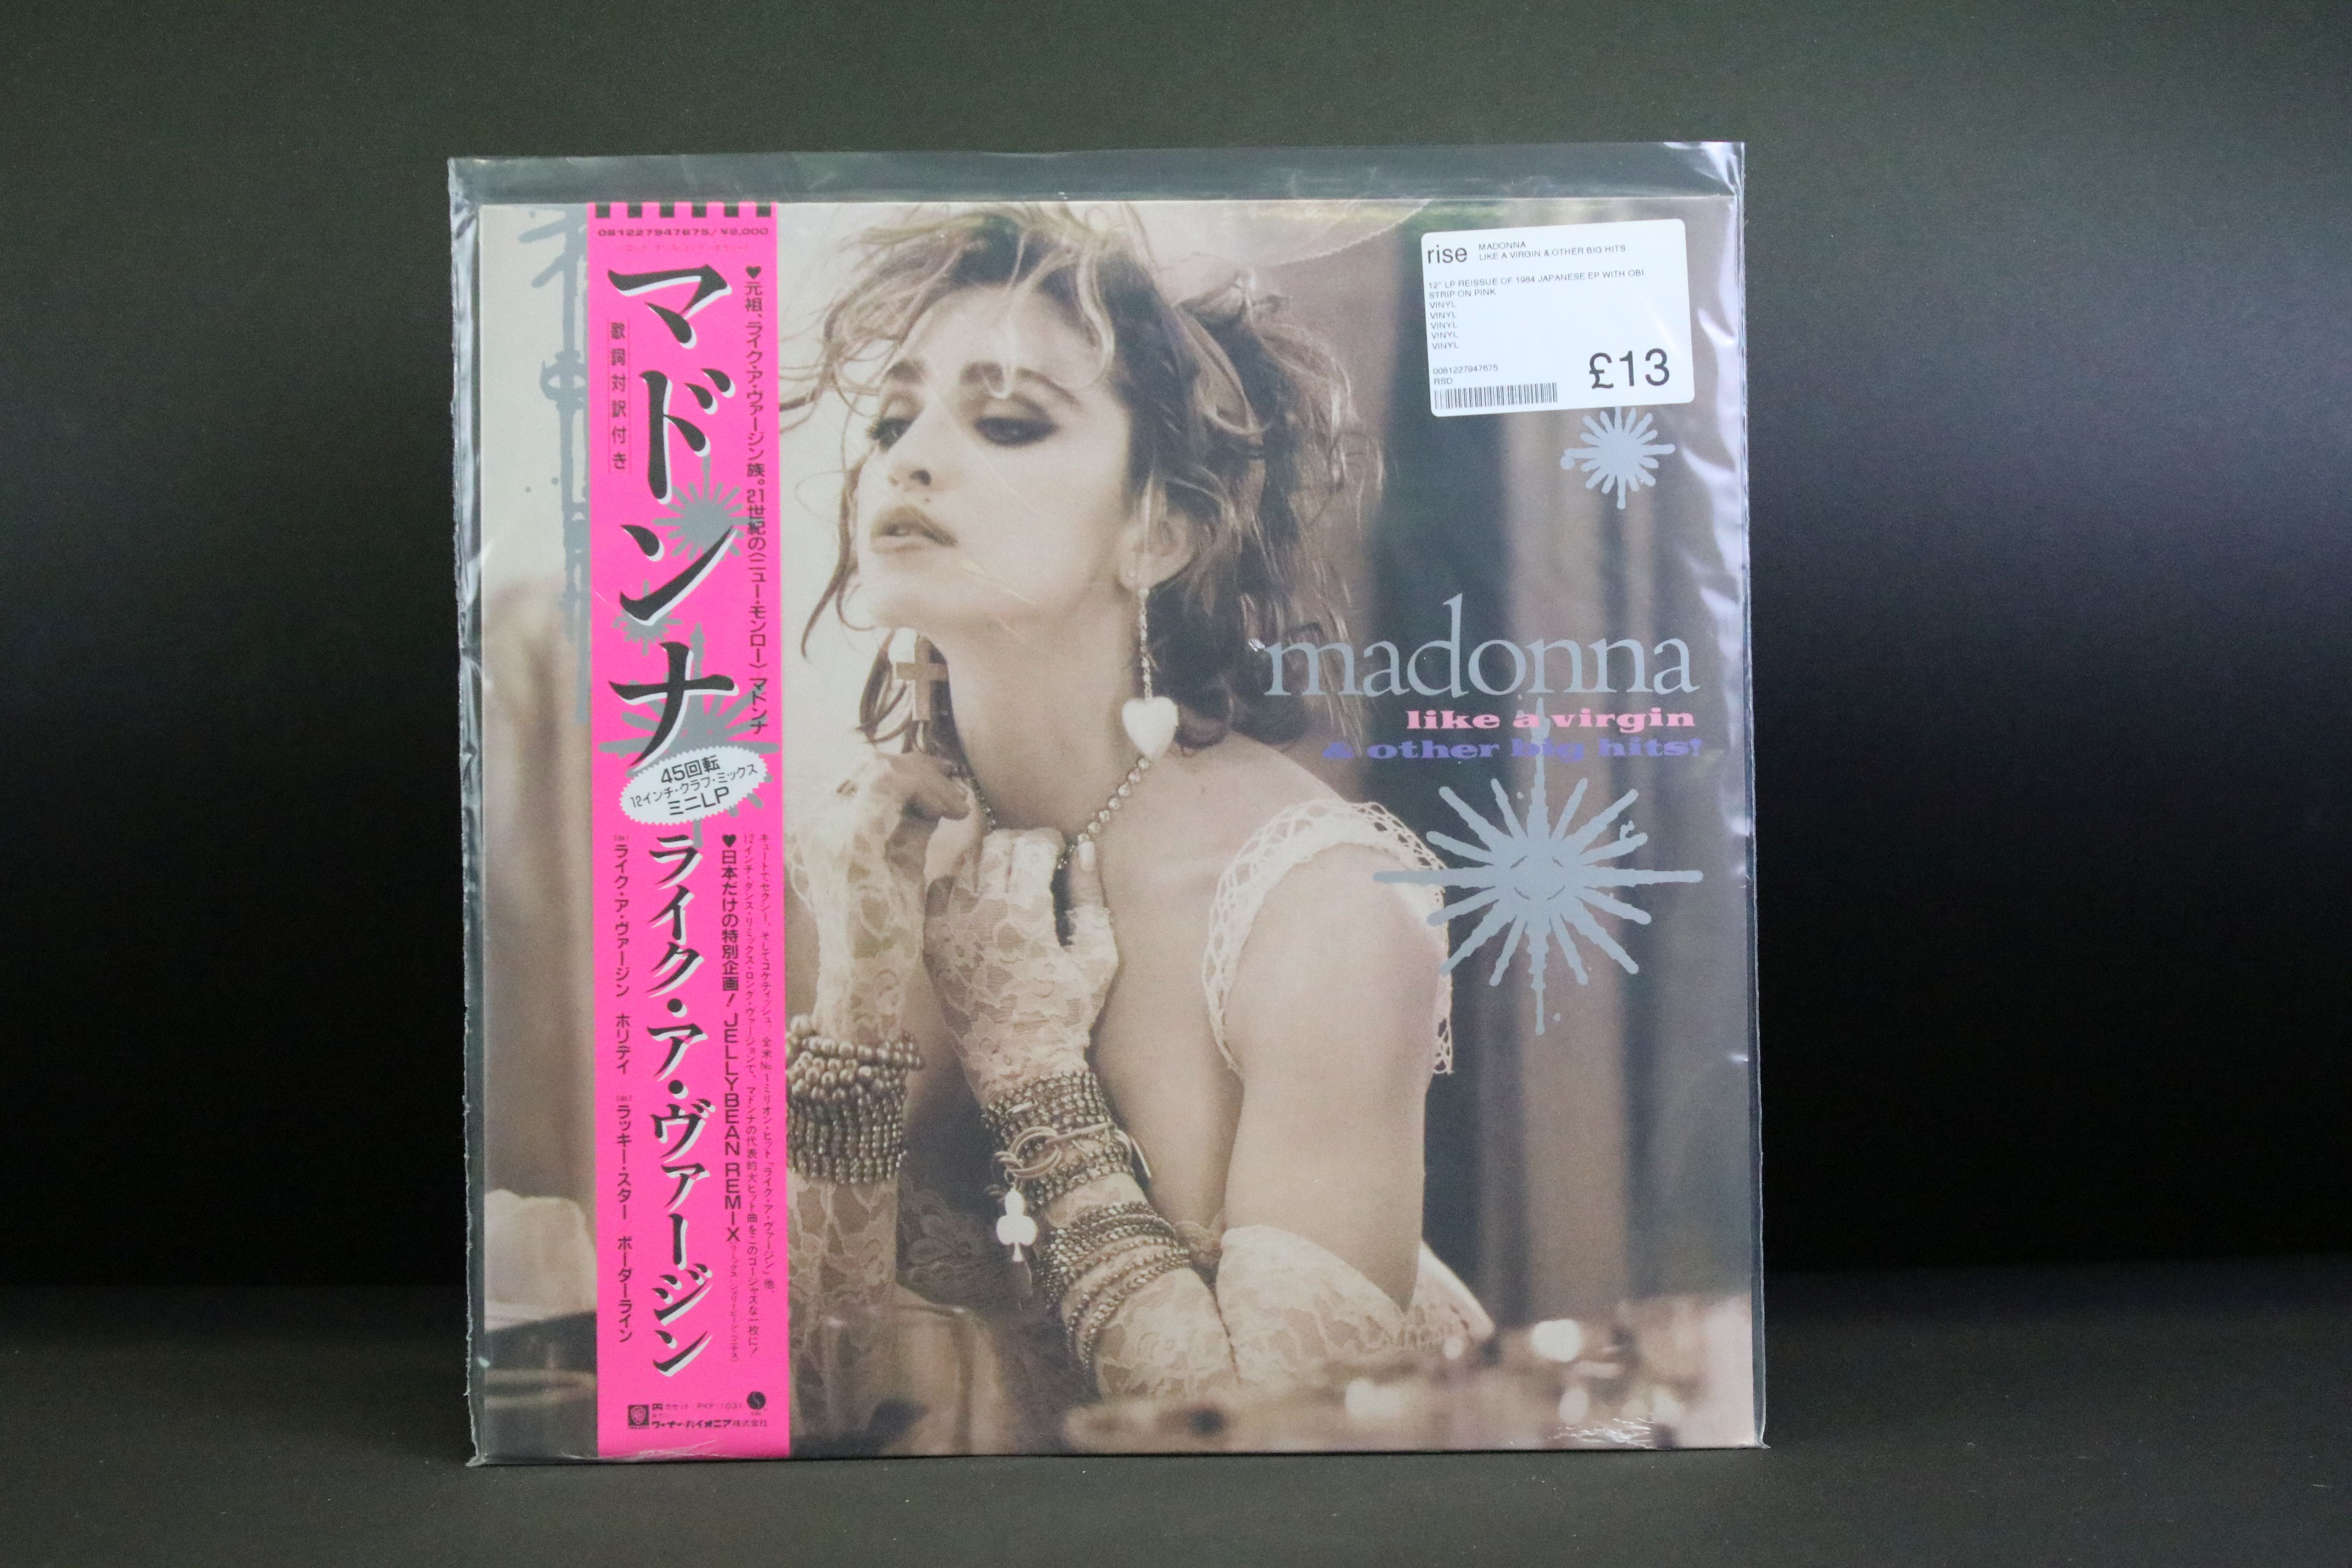 Vinyl - 3 sealed reissue LPs to include Kate Bush Hounds Of Love (AFZLP 087) Audio Fidelity ltd - Image 4 of 7